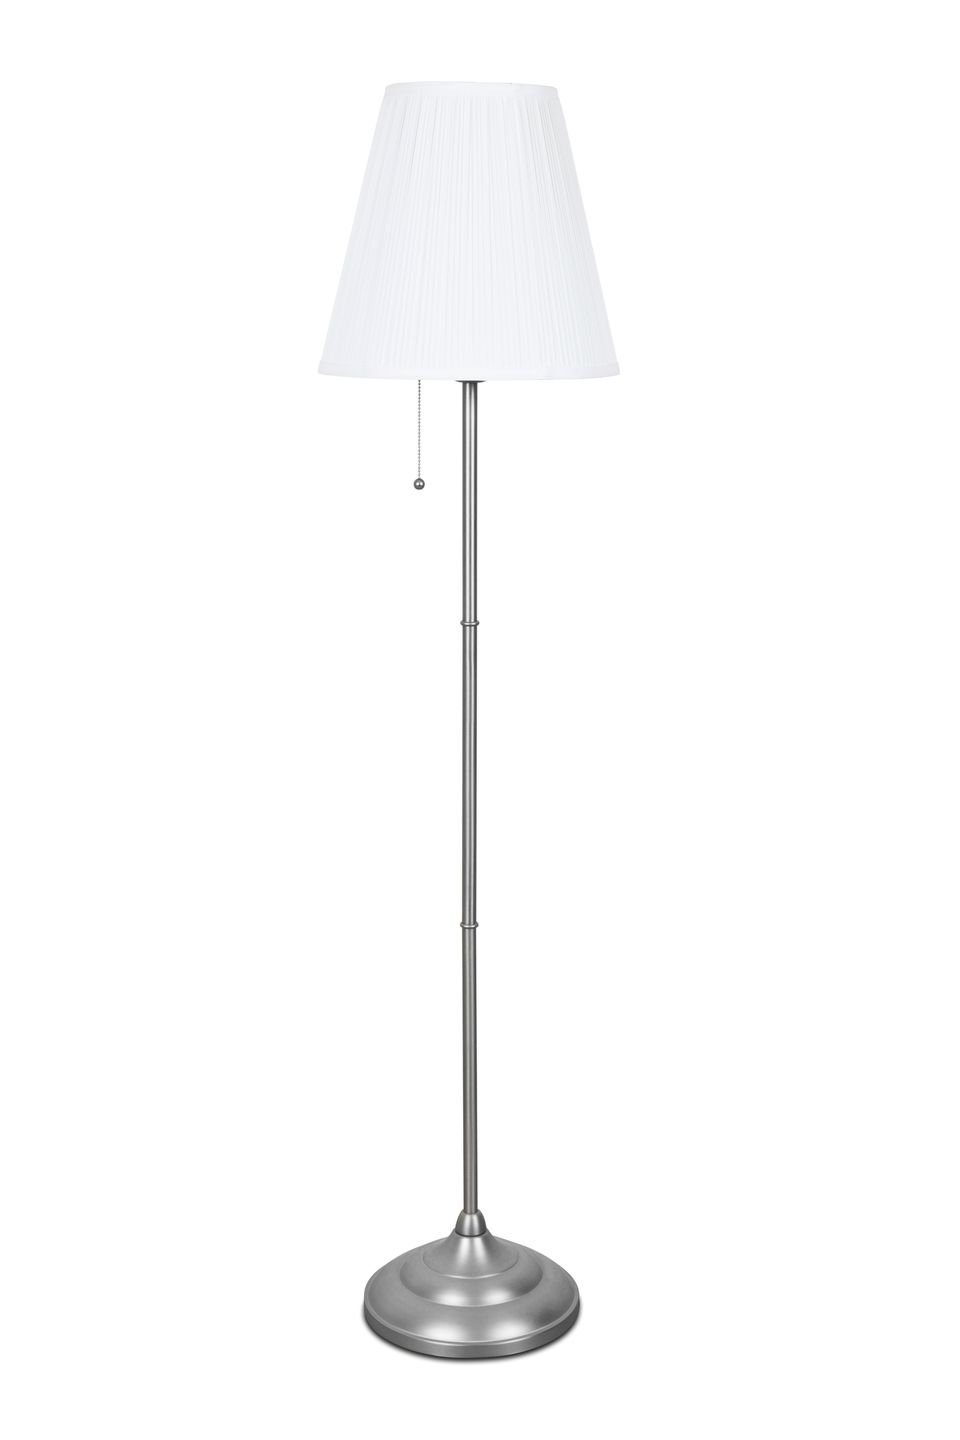 Different Types Of Floor Lamps intended for size 960 X 1440